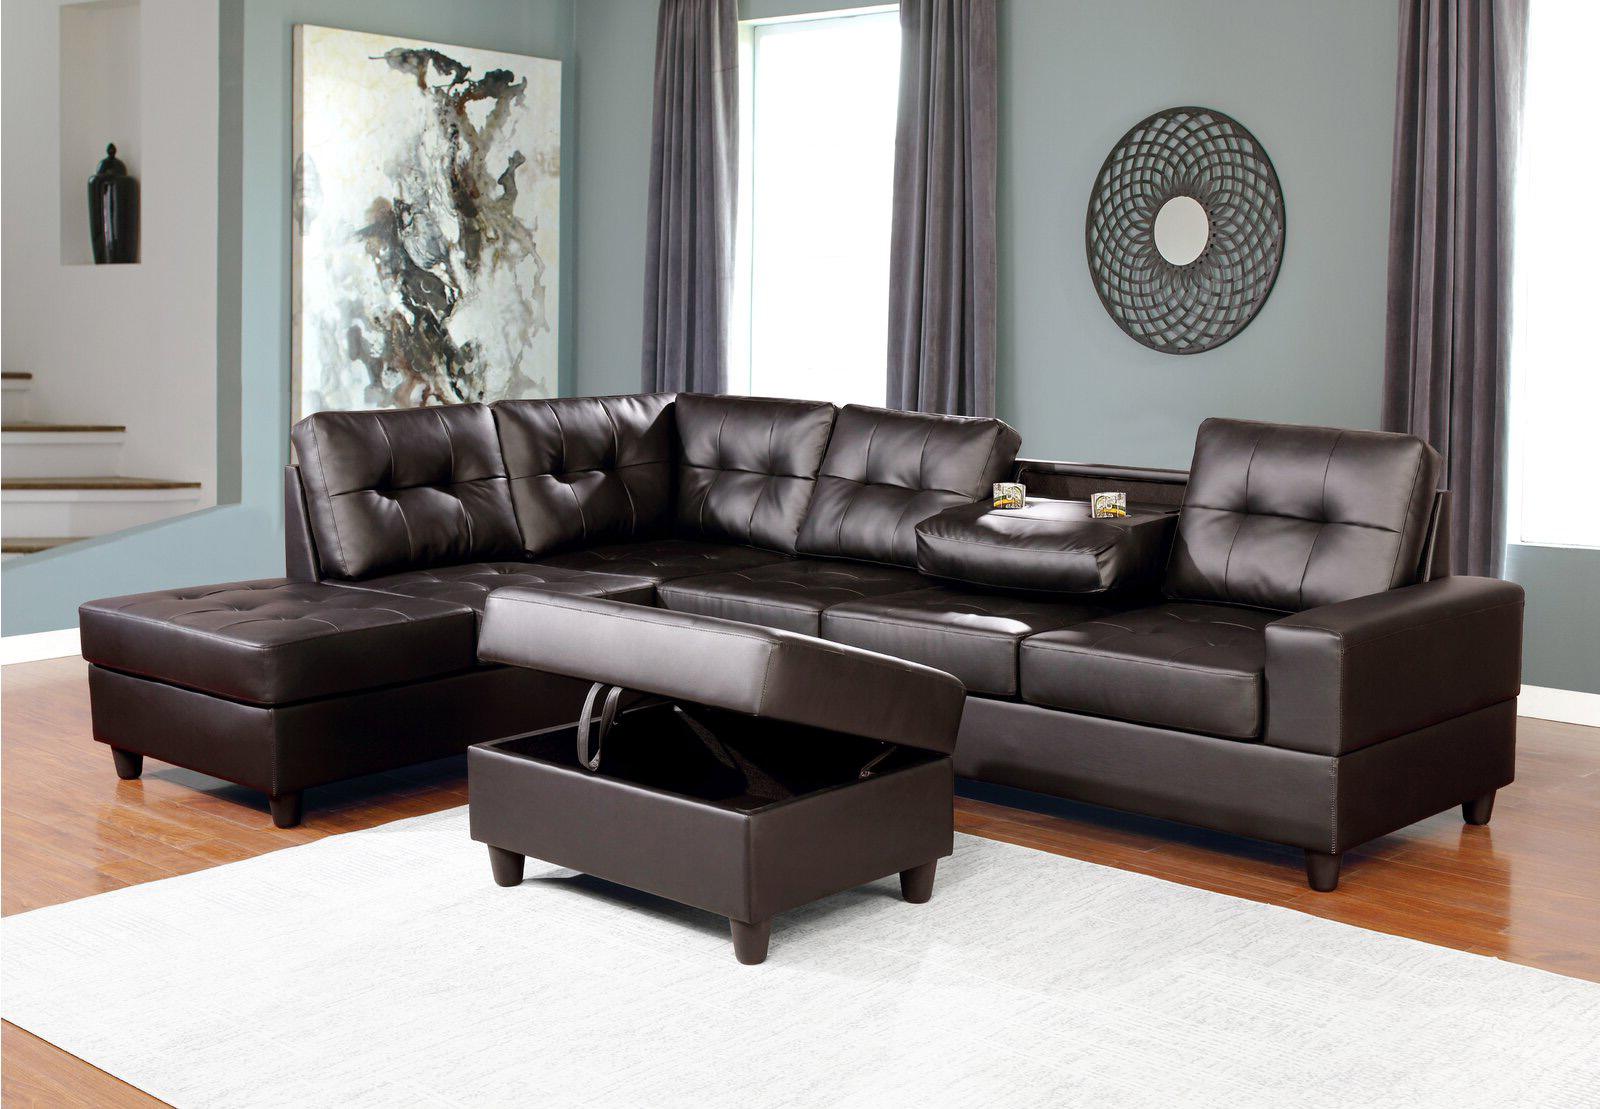 

    
Brown Eco Leather Sectional Reversable Sofa BOSTON Galaxy Home Contemporary
